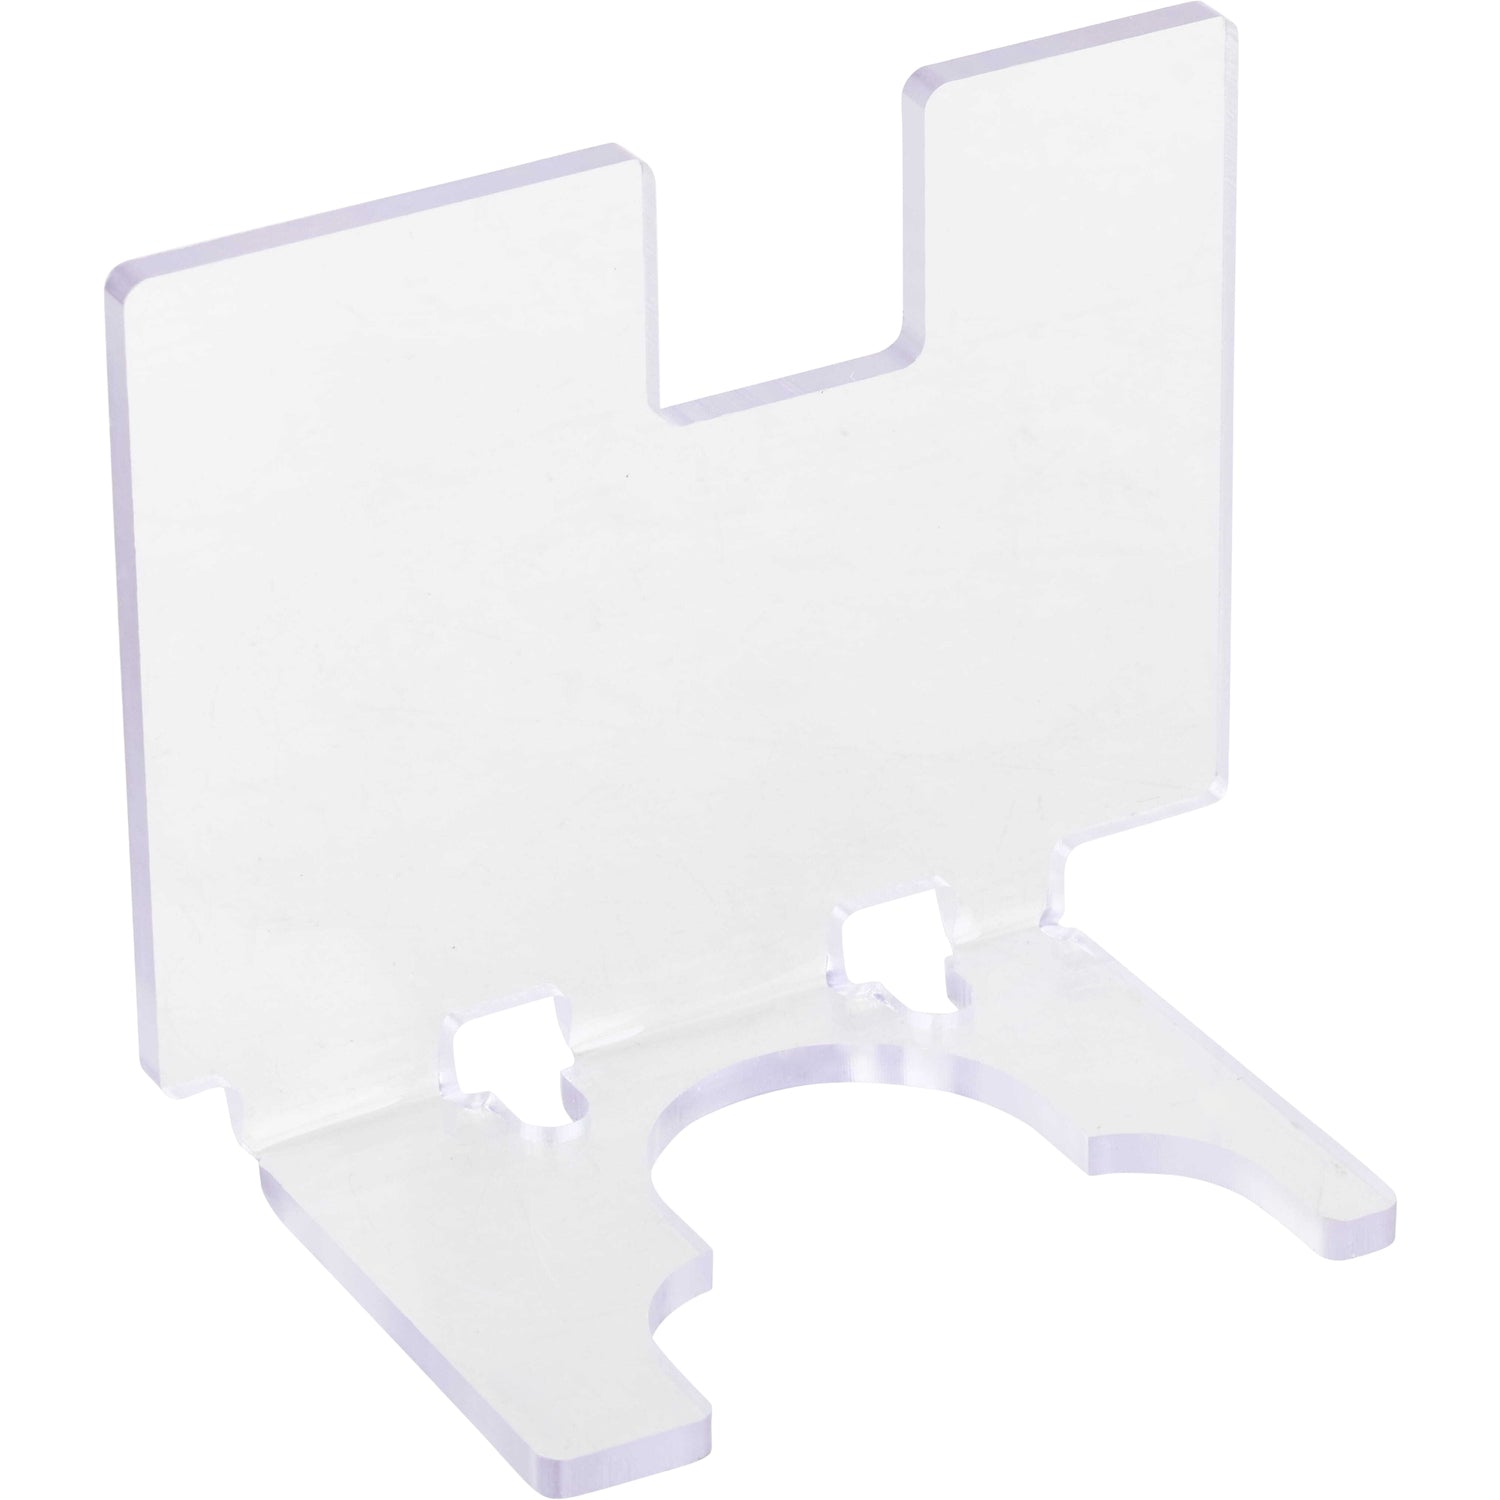 Clear bent polycarbonate guarding shown on a white background. 